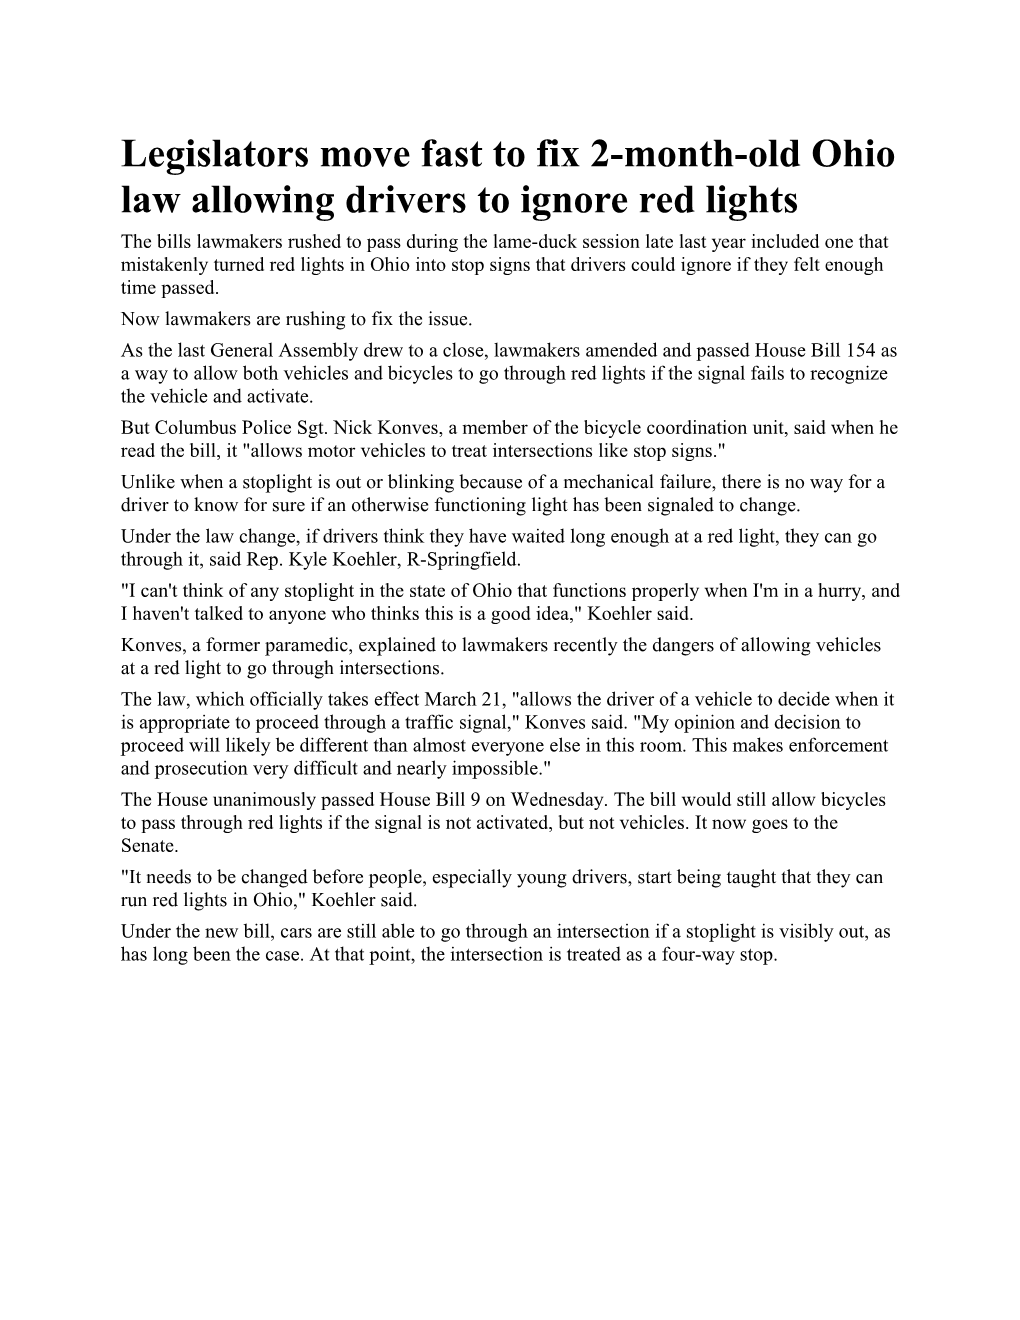 Legislators Move Fast to Fix 2-Month-Old Ohio Law Allowing Drivers to Ignore Red Lights